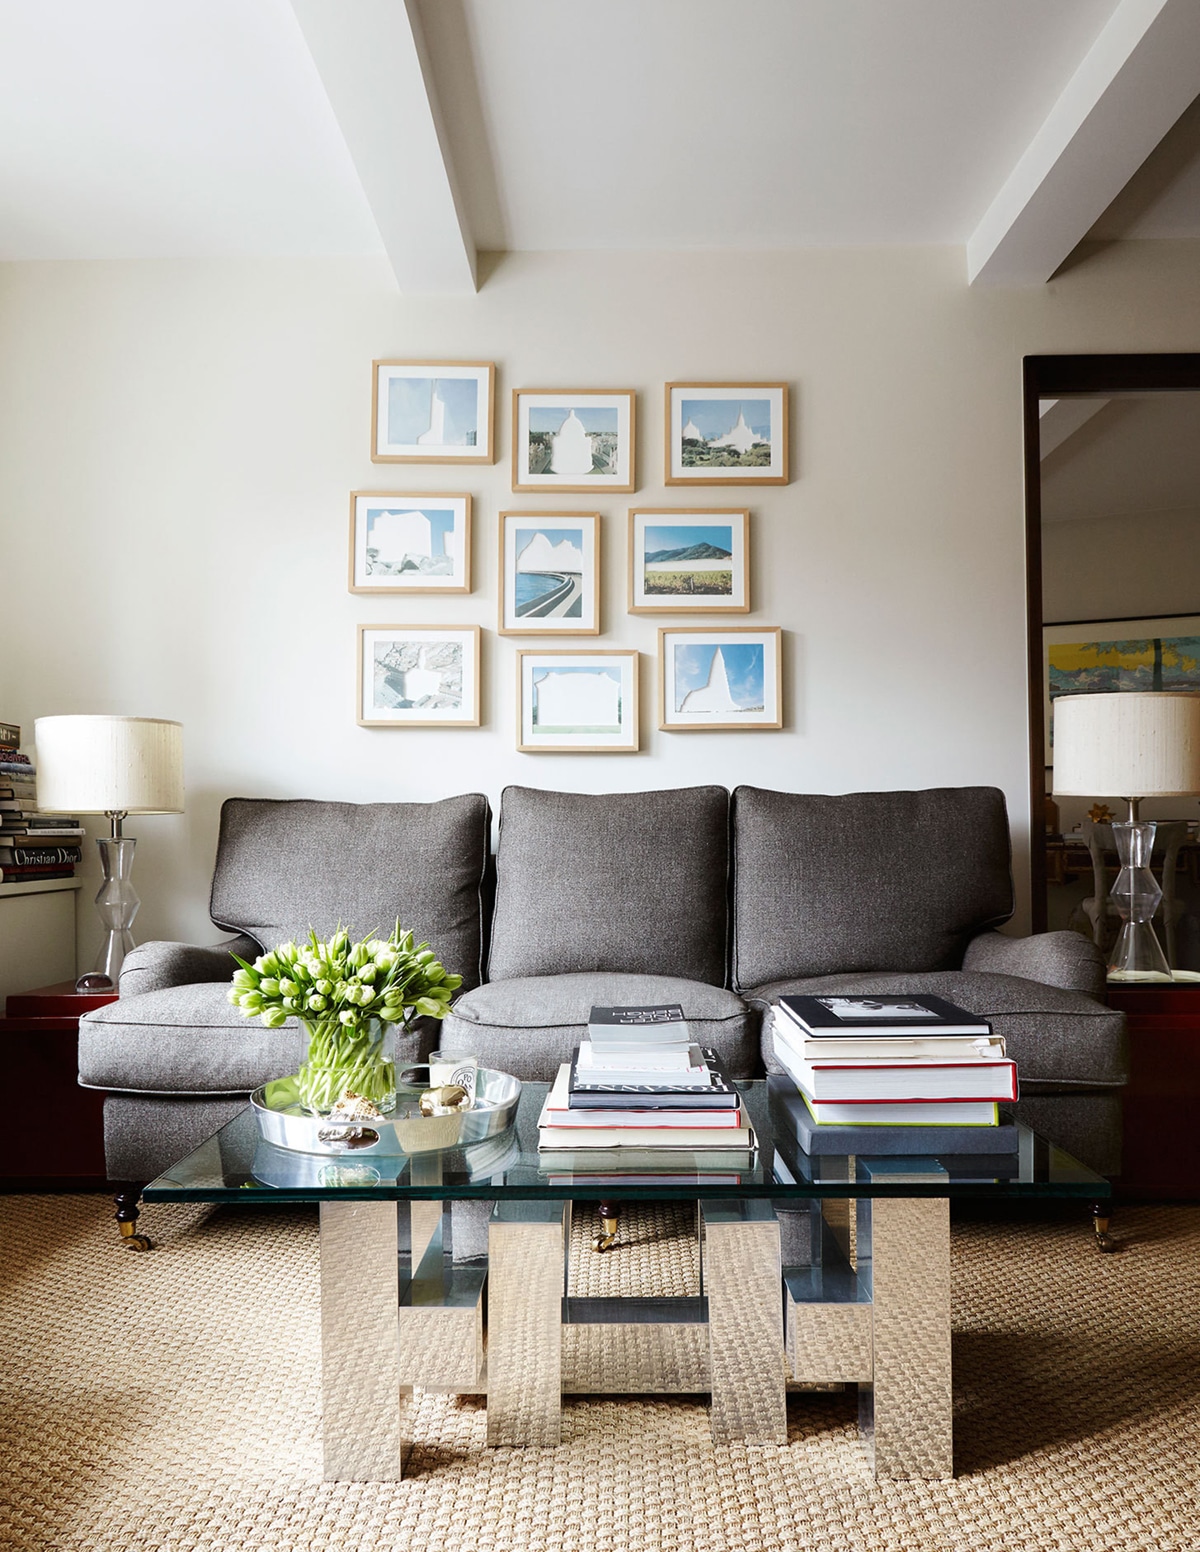 a living room vignette with quirky art and vintage chrome coffee table | room of the week via coco kelley